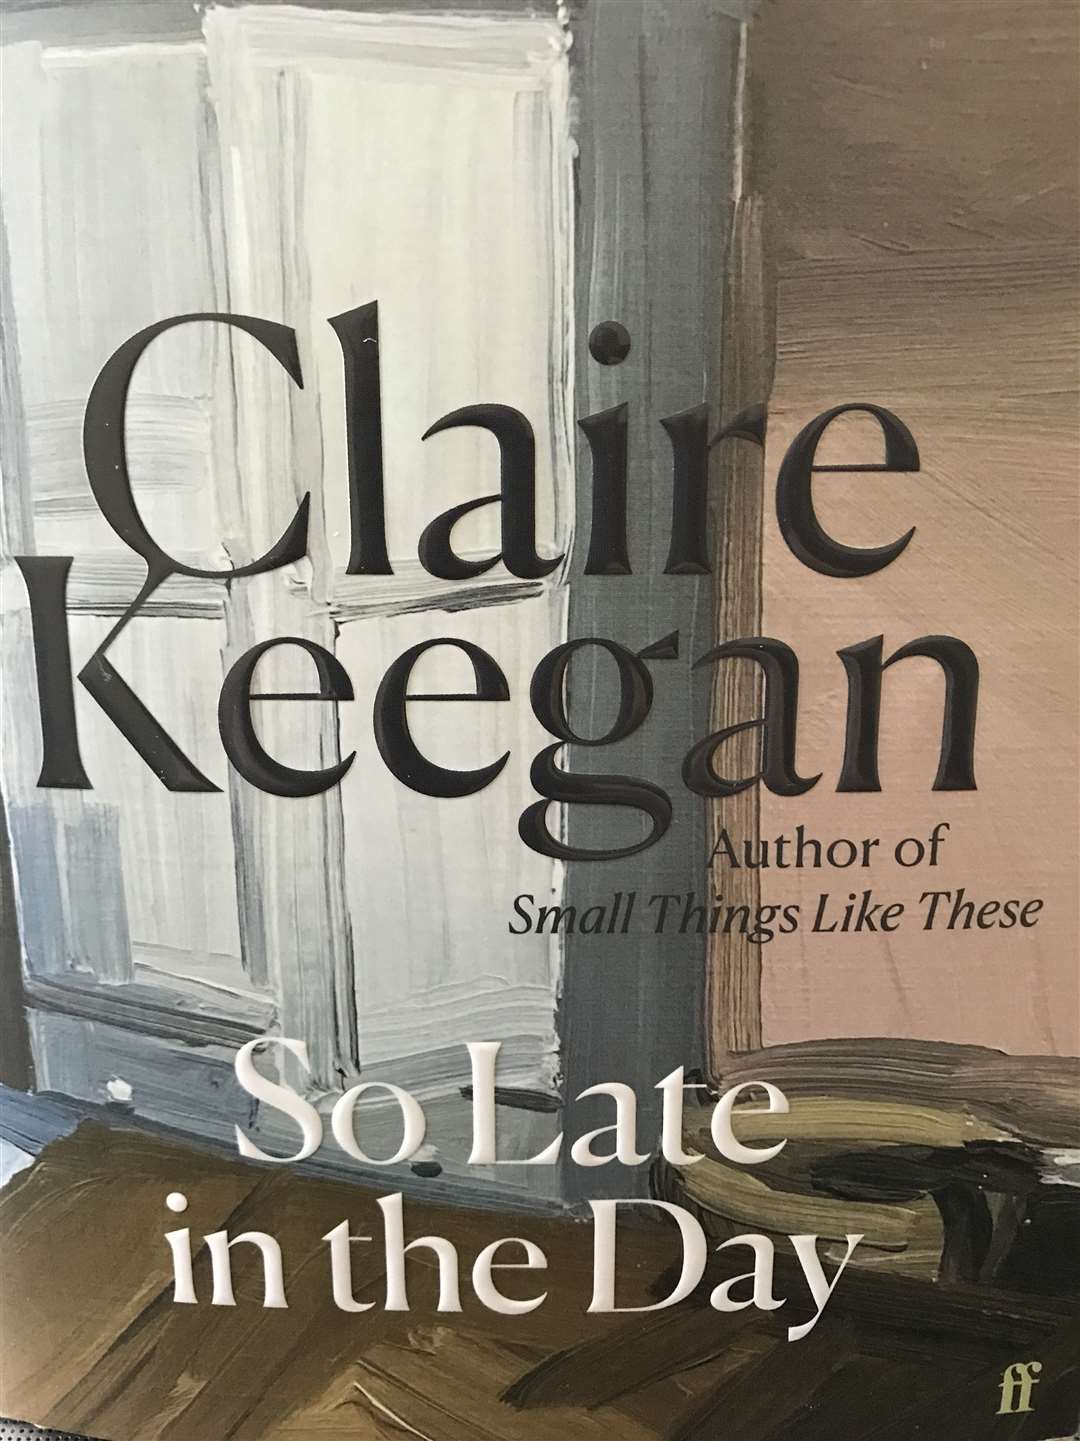 So Late In The Day, by Claire Keegan.